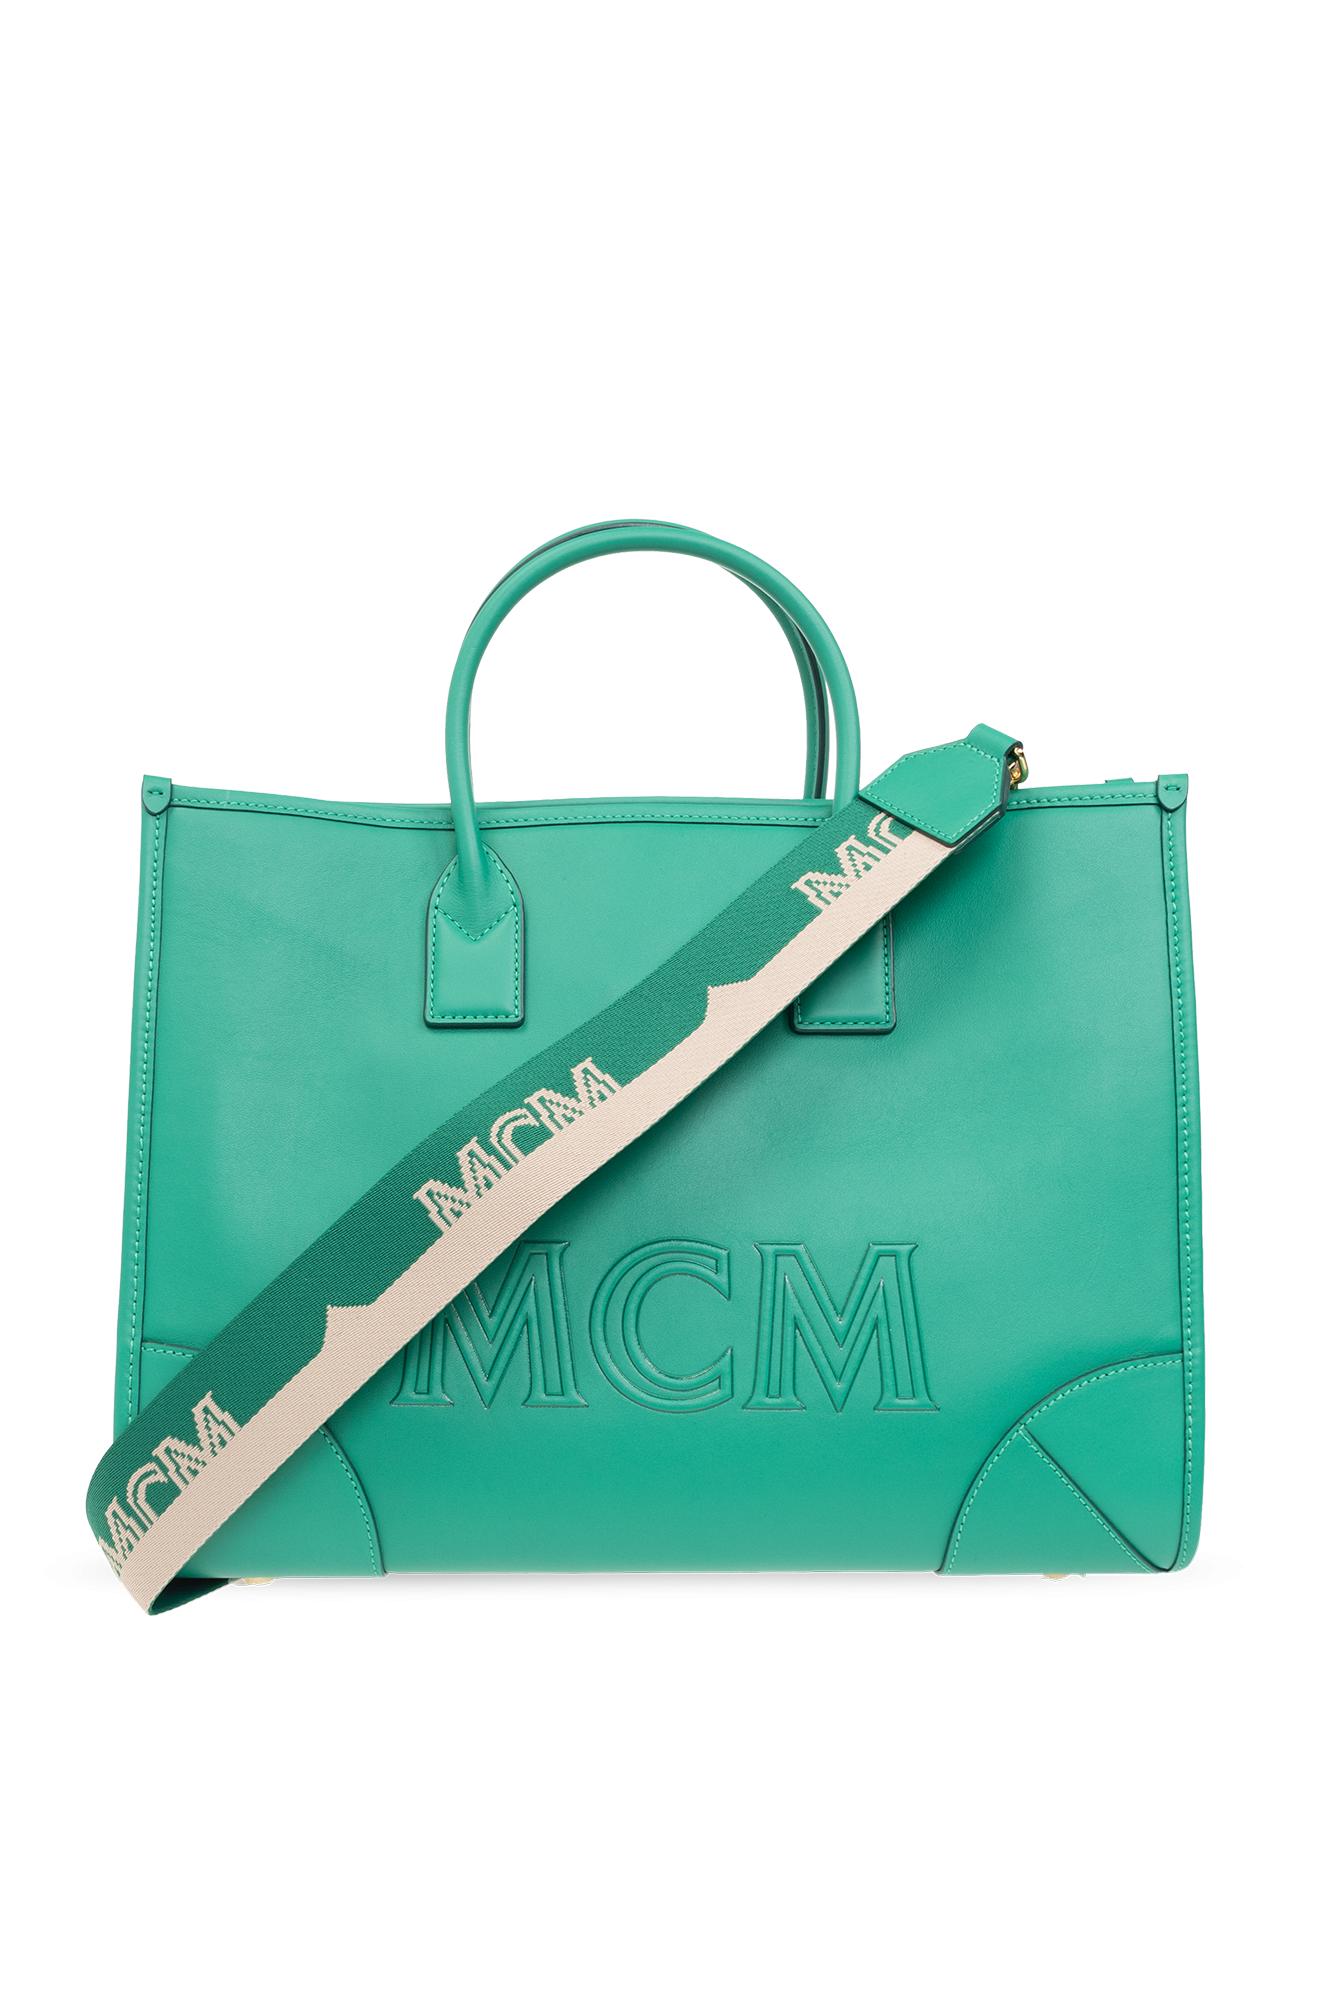 Mcm Large Munchen Leather Tote Bag - Green